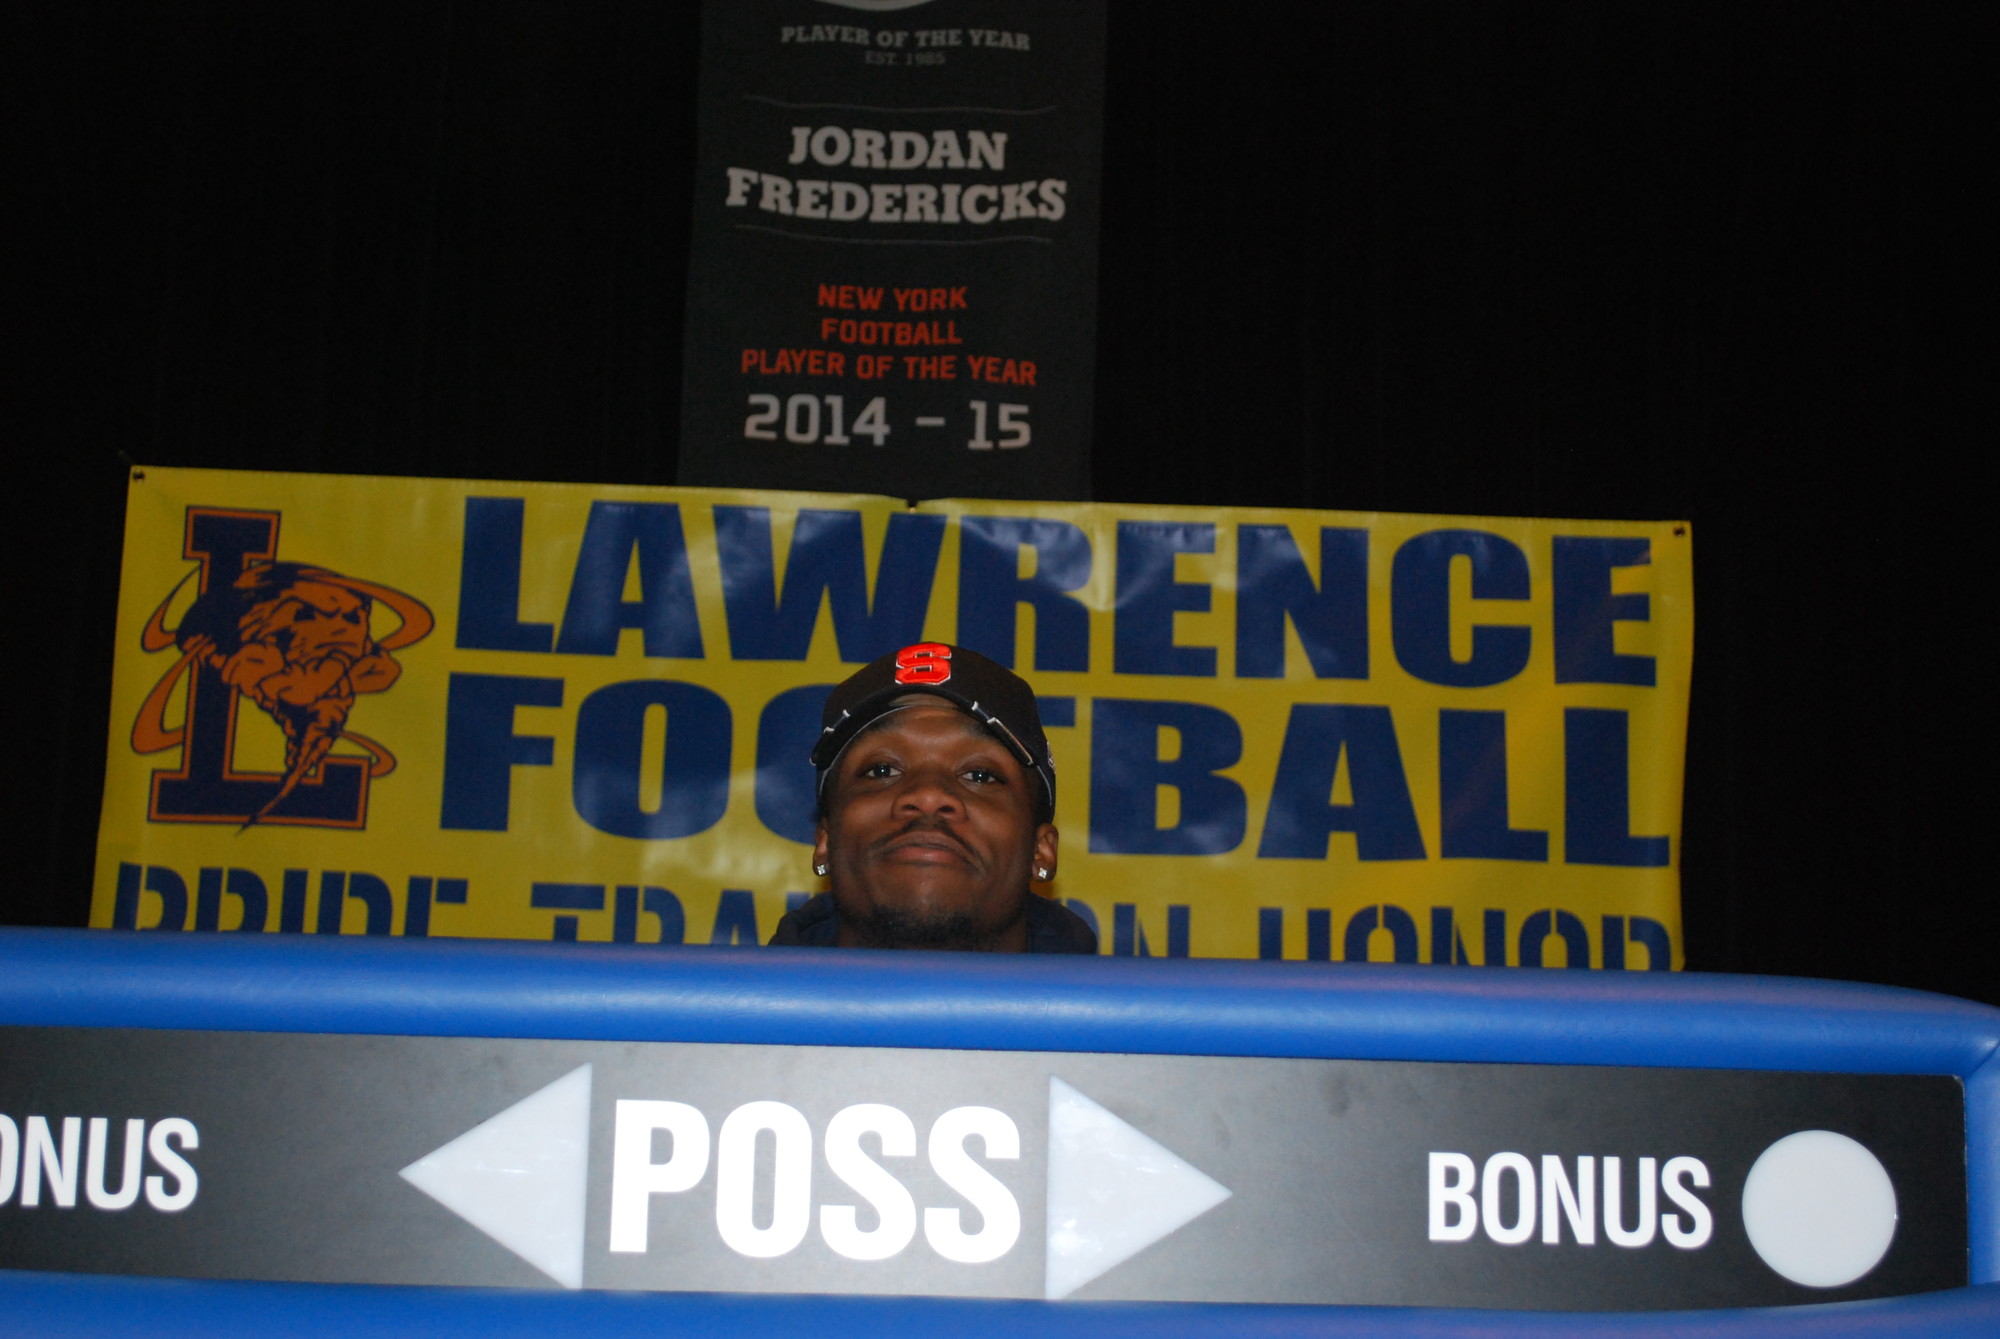 Syracuse University-bound football player Jordan Fredericks enjoyed his letter in intent signing event in Lawrence High's Little Theater.